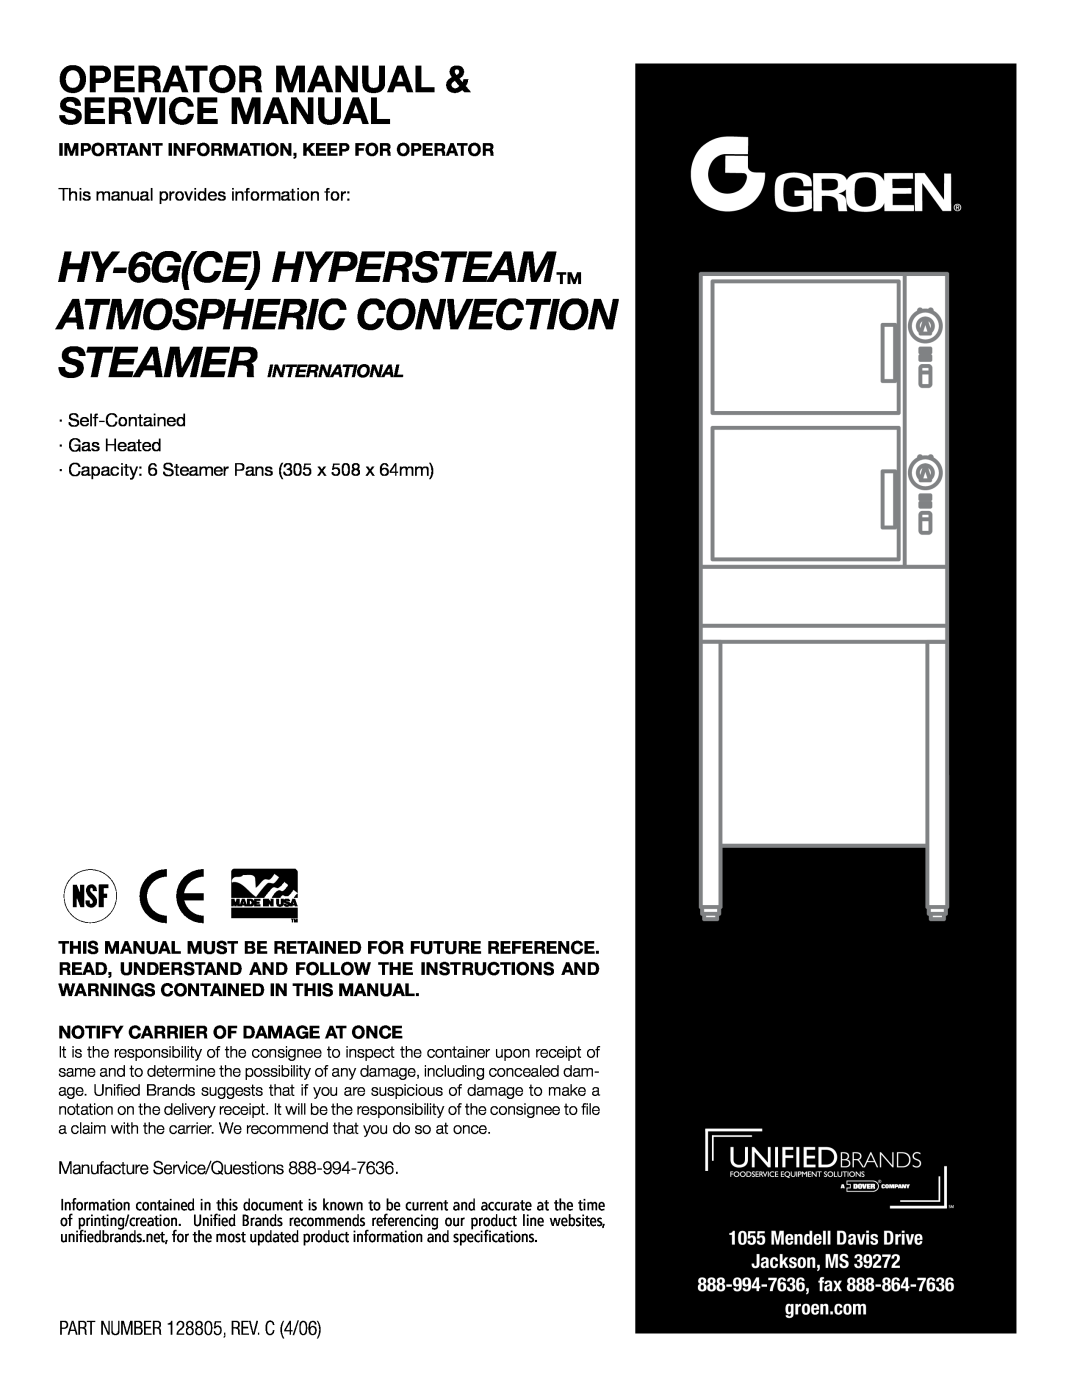 Unified Brands HY-6G(CE) service manual HY-6GCEHYPERSTEAM ATMOSPHERIC CONVECTION, PART NUMBER 128805, REV. C 4/06 